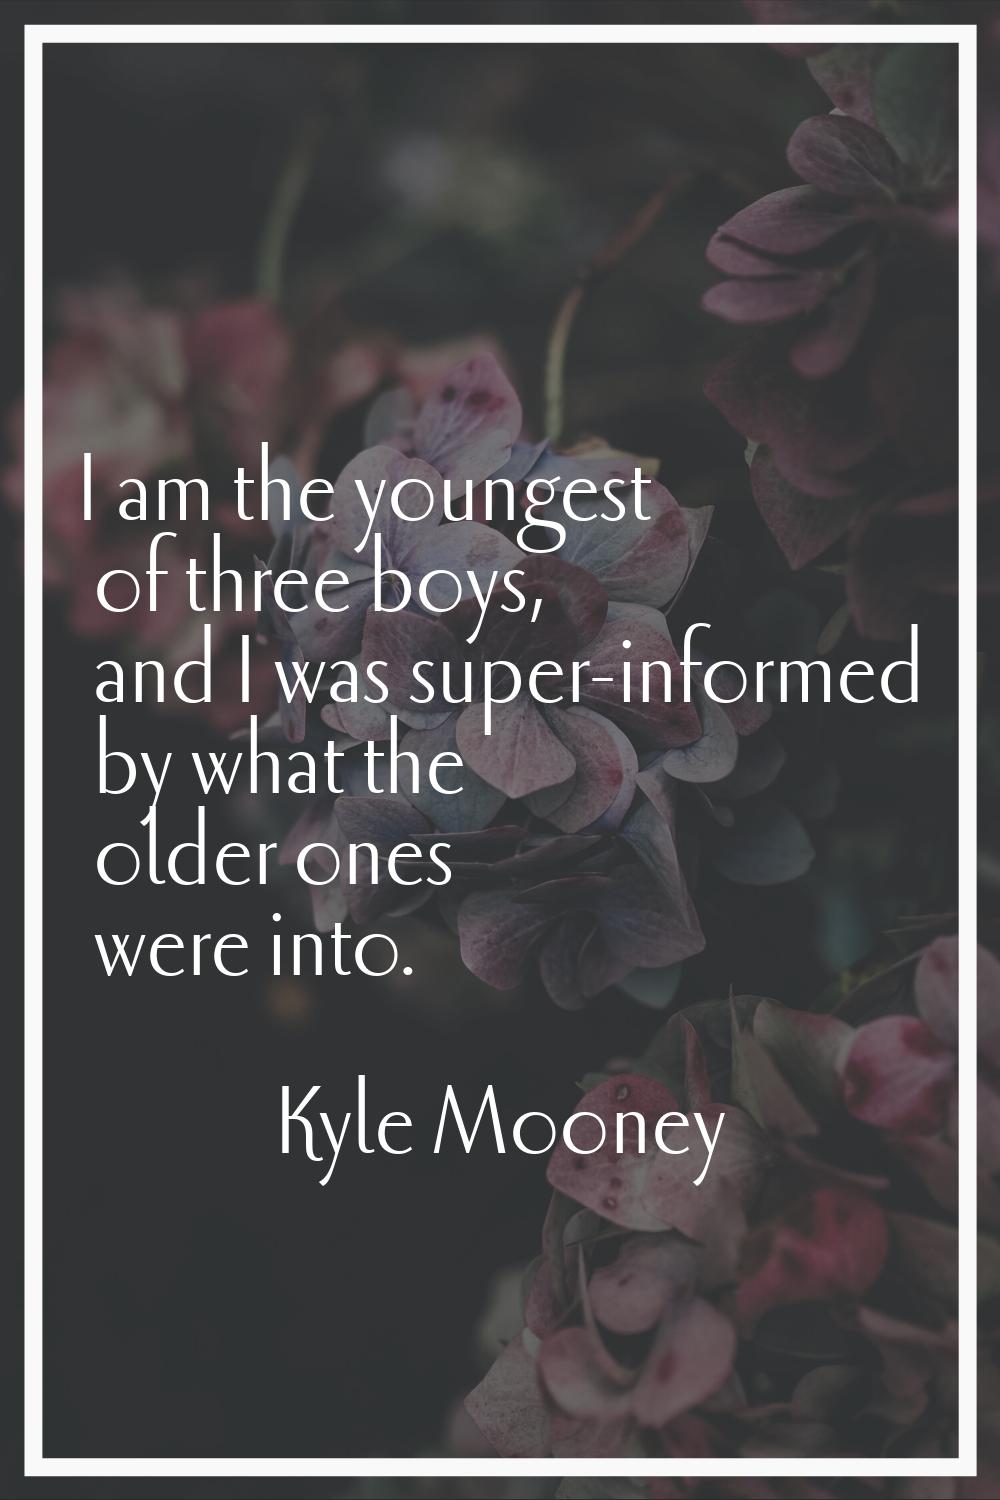 I am the youngest of three boys, and I was super-informed by what the older ones were into.